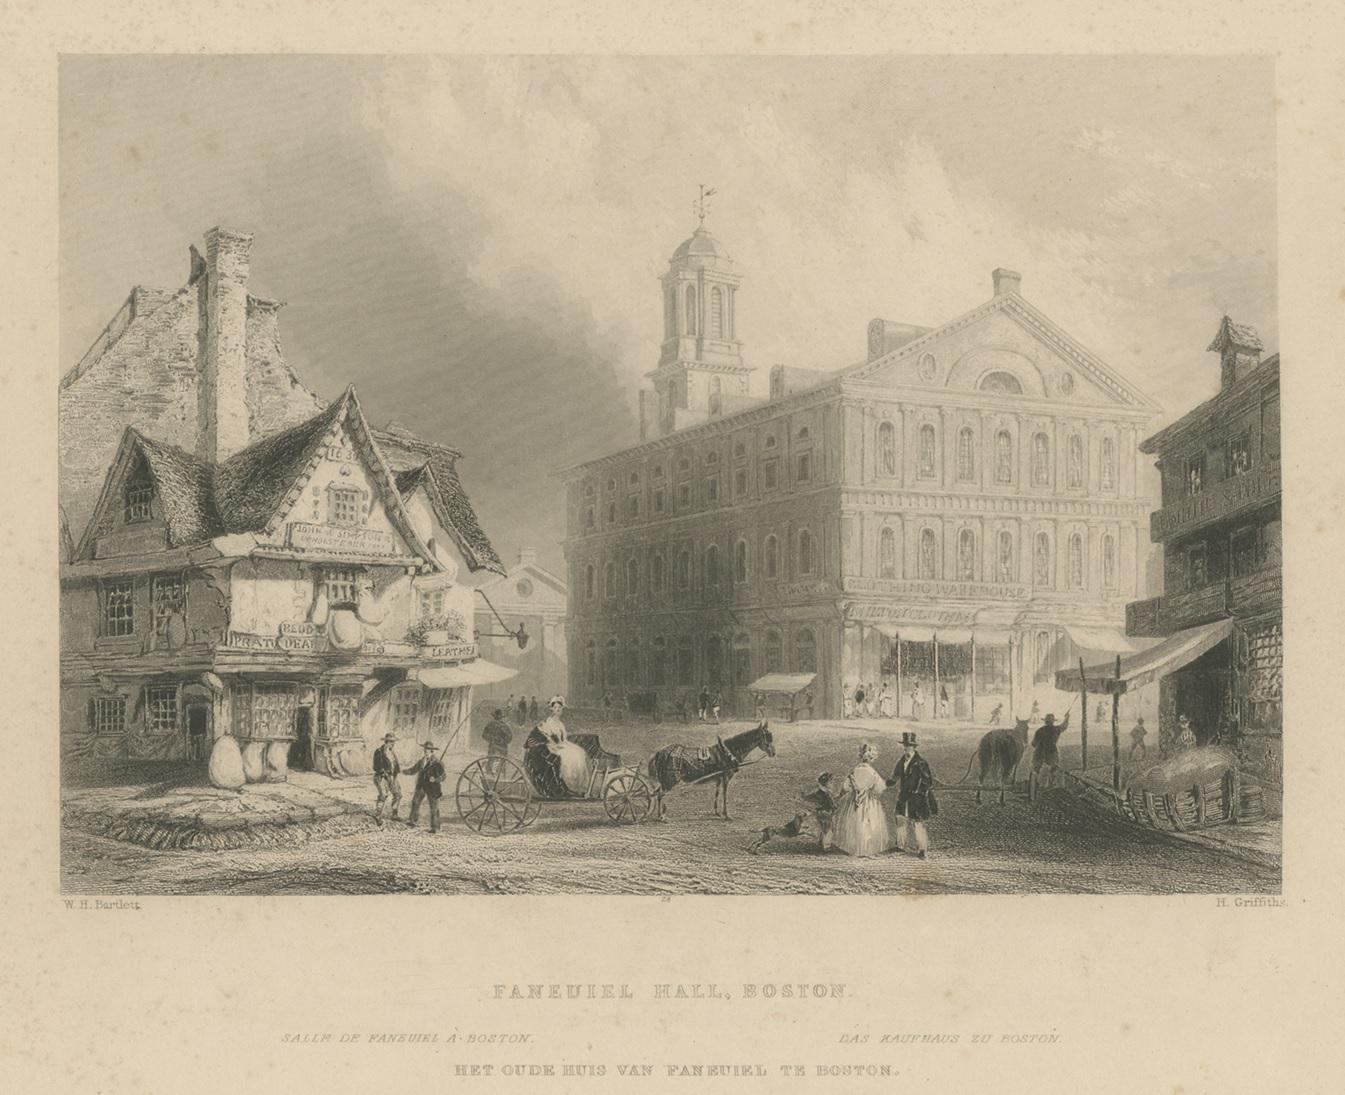 Antique print titled 'Faneuiel Hall, Botson'. View of Faneuil Hall in Boston, Massachusetts. Engraved by H. Griffiths. Published for the Proprietors by Geo Virtue, circa 1860.